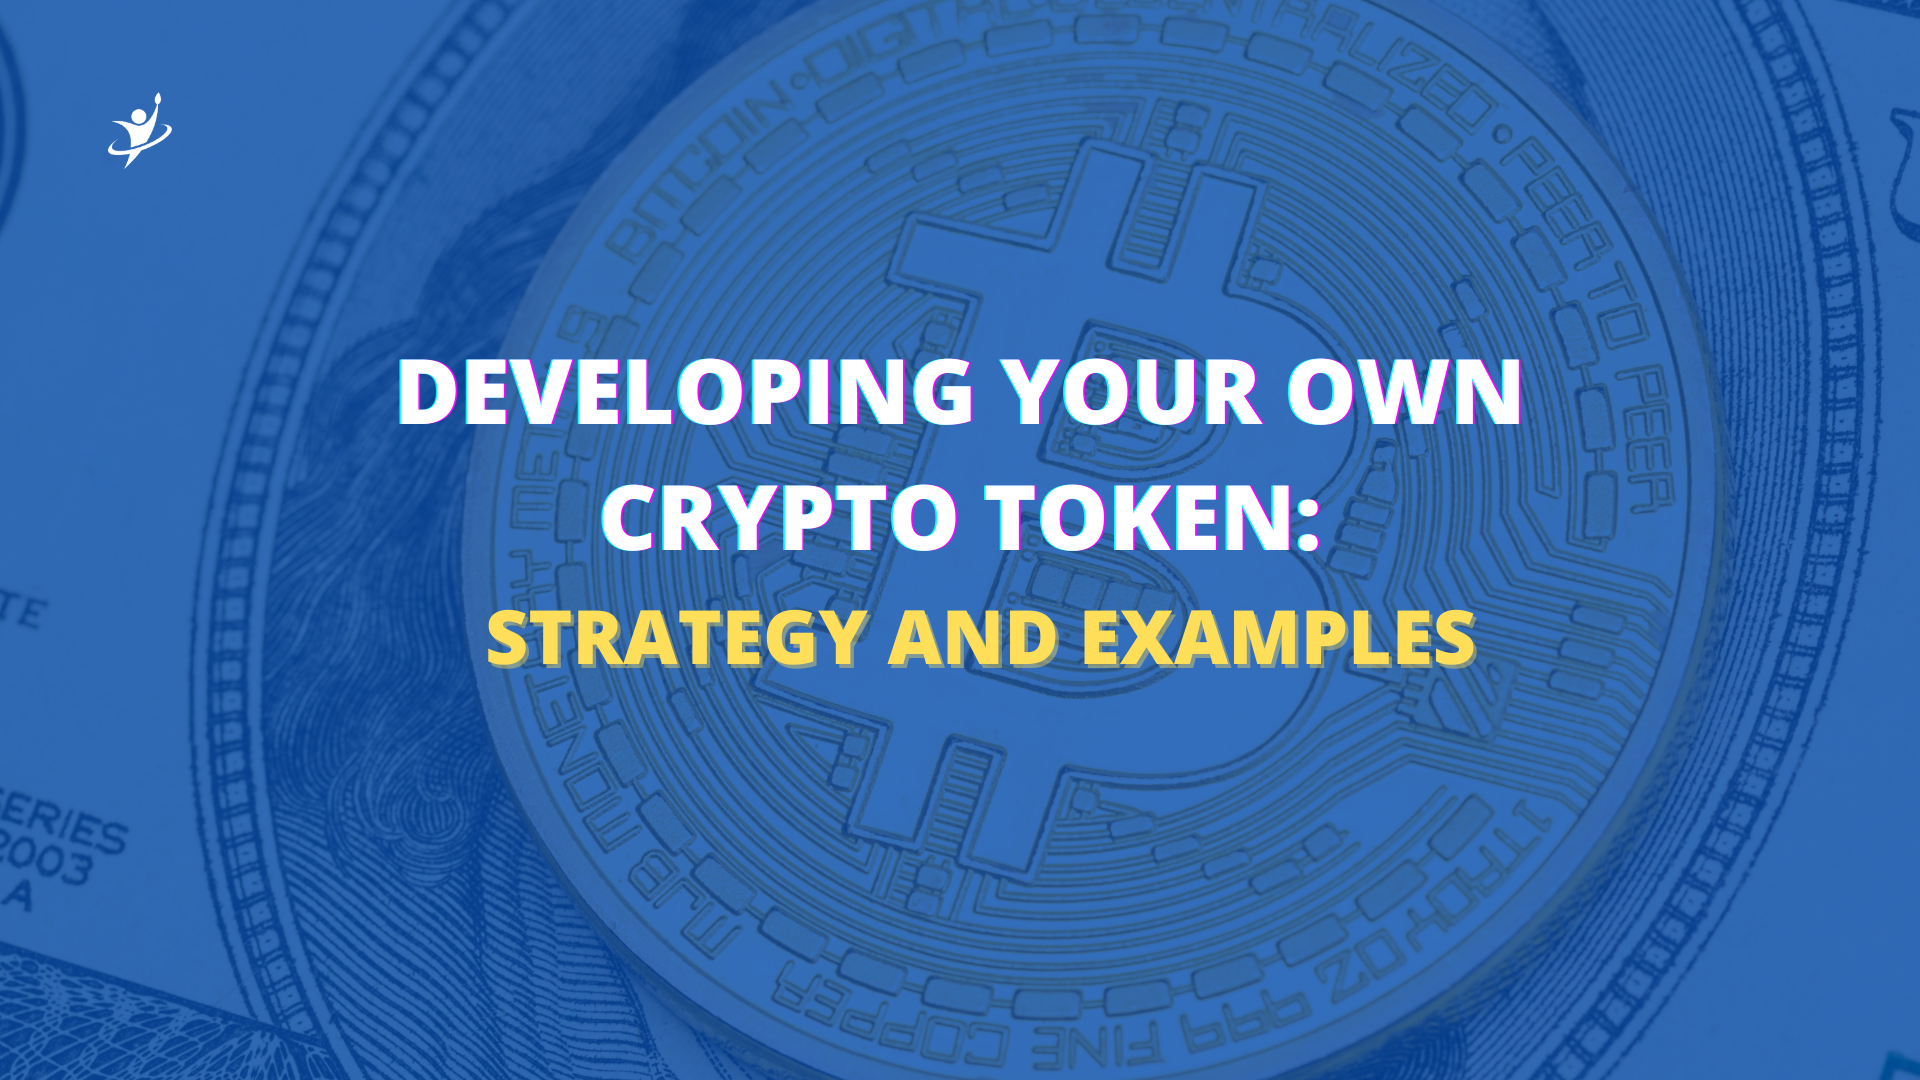 Developing Your Own Crypto Token: Strategy and Examples